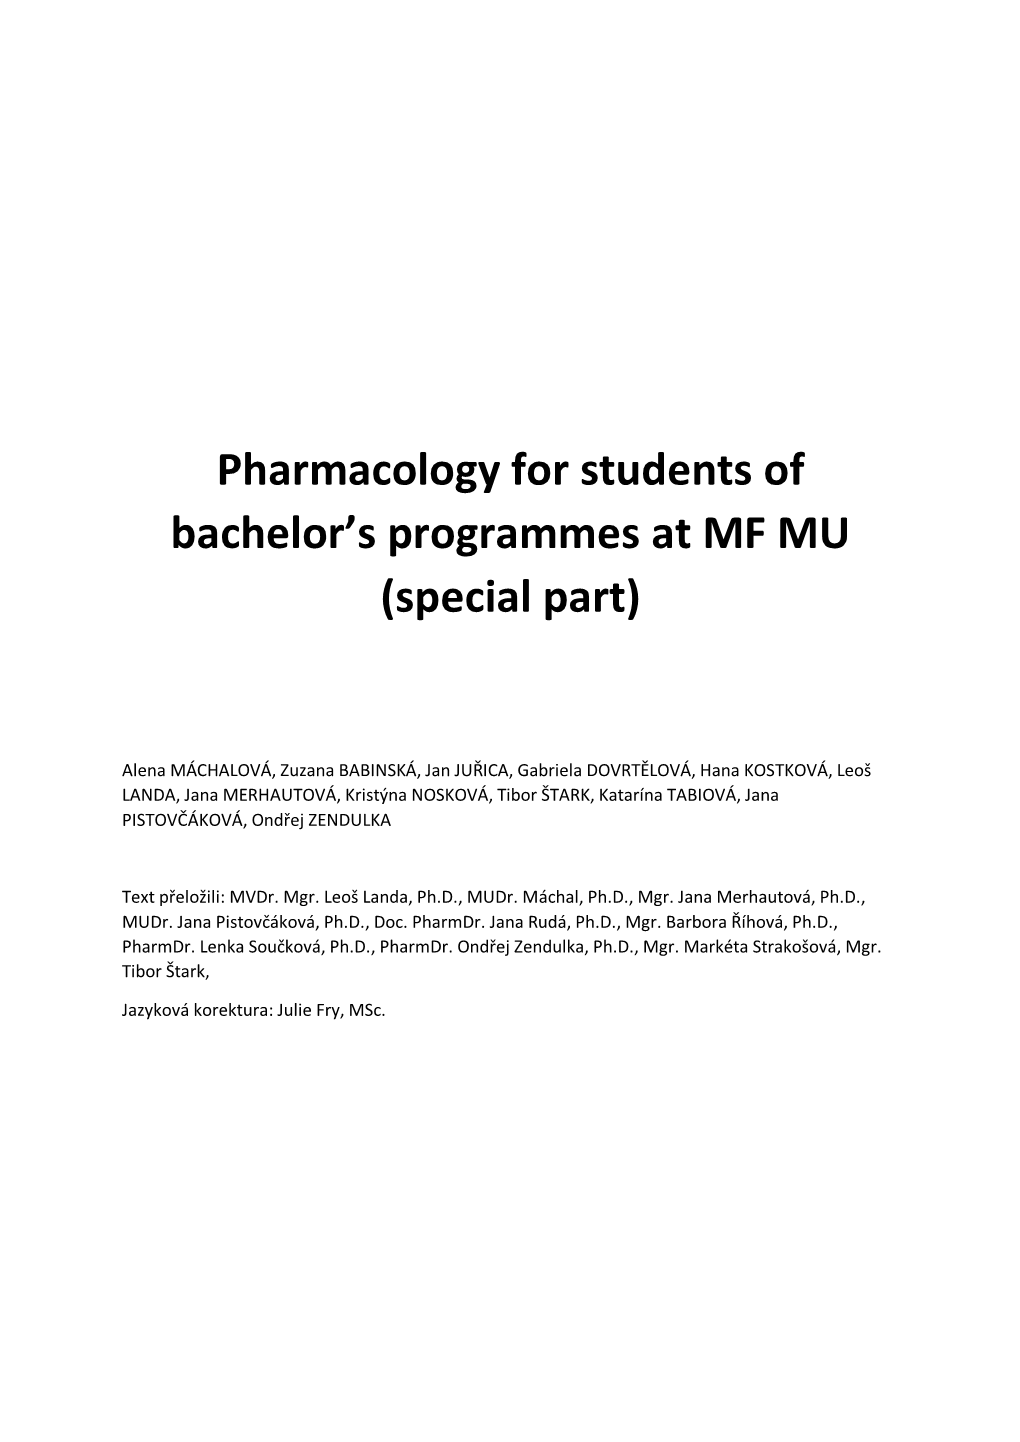 Pharmacology for Students of Bachelor's Programmes at MF MU